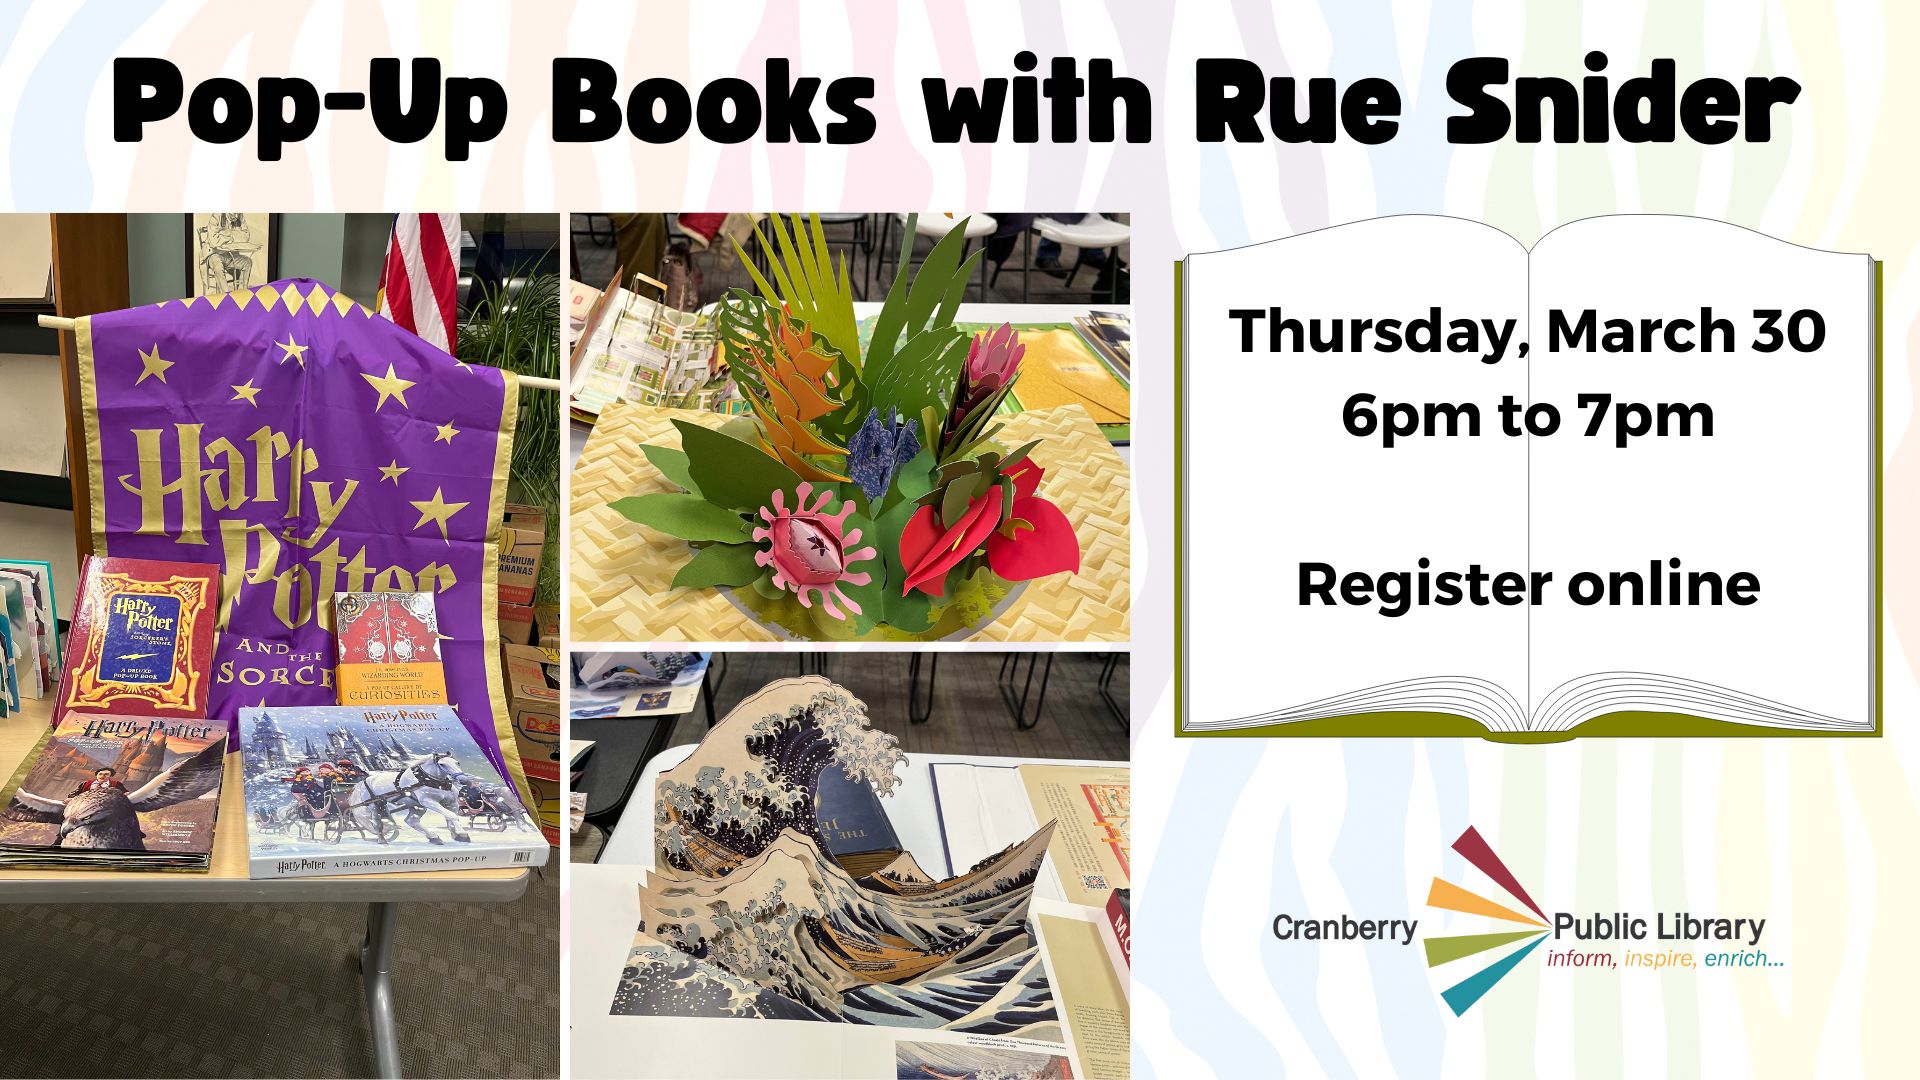 Flyer for Pop Up Books with Rue Snider presentation